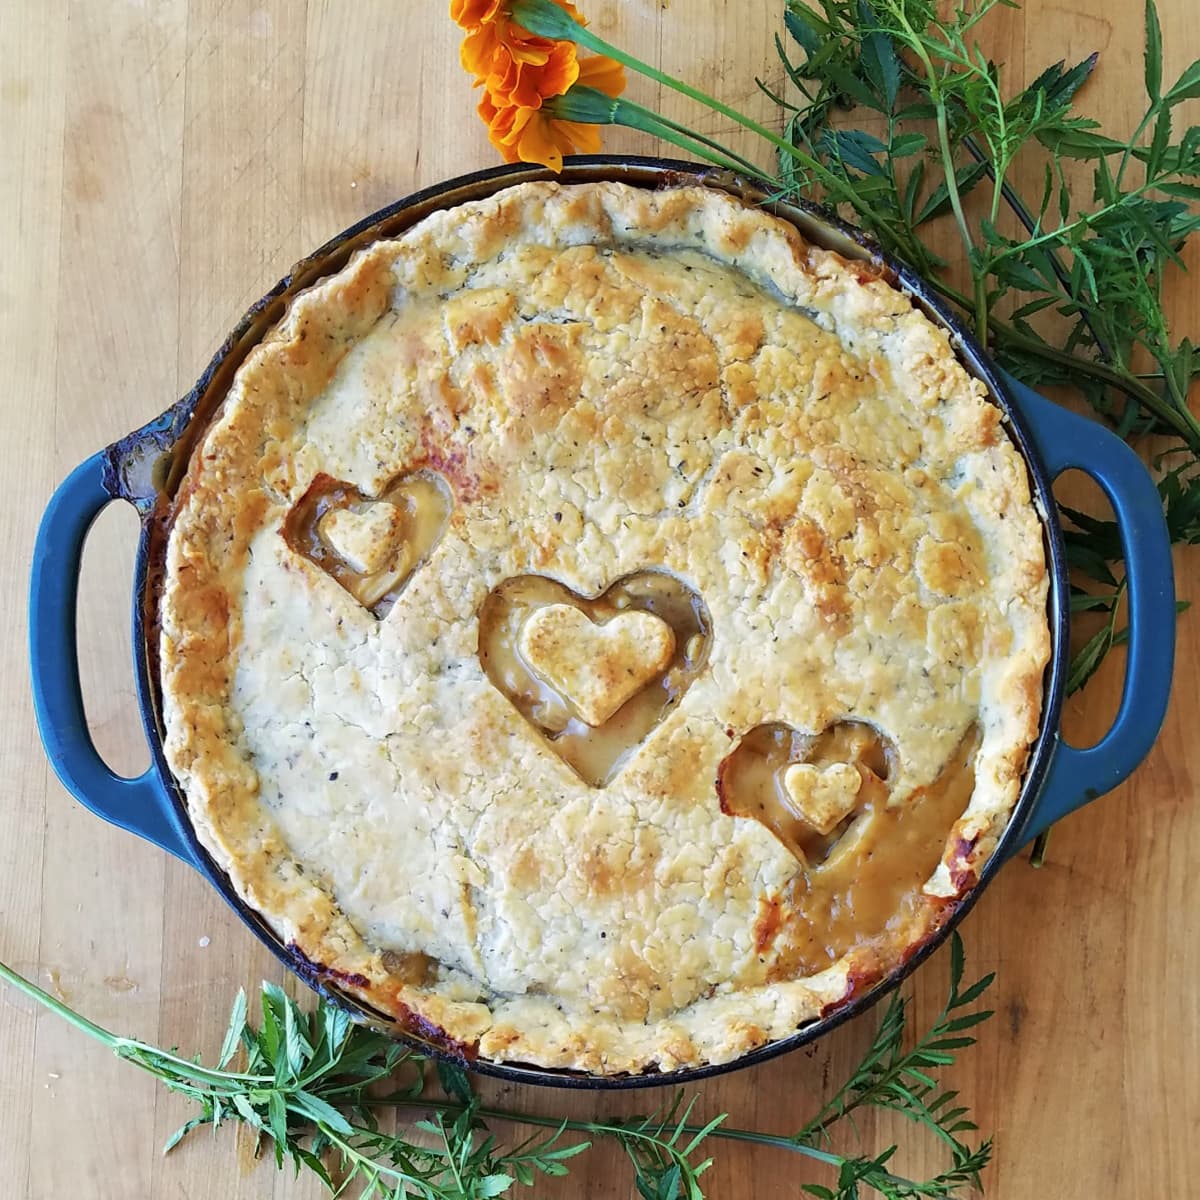 Classic Chicken Pot Pie baked in a large cast iron skillet. Hearts are cut out of the pie crust to vent. 